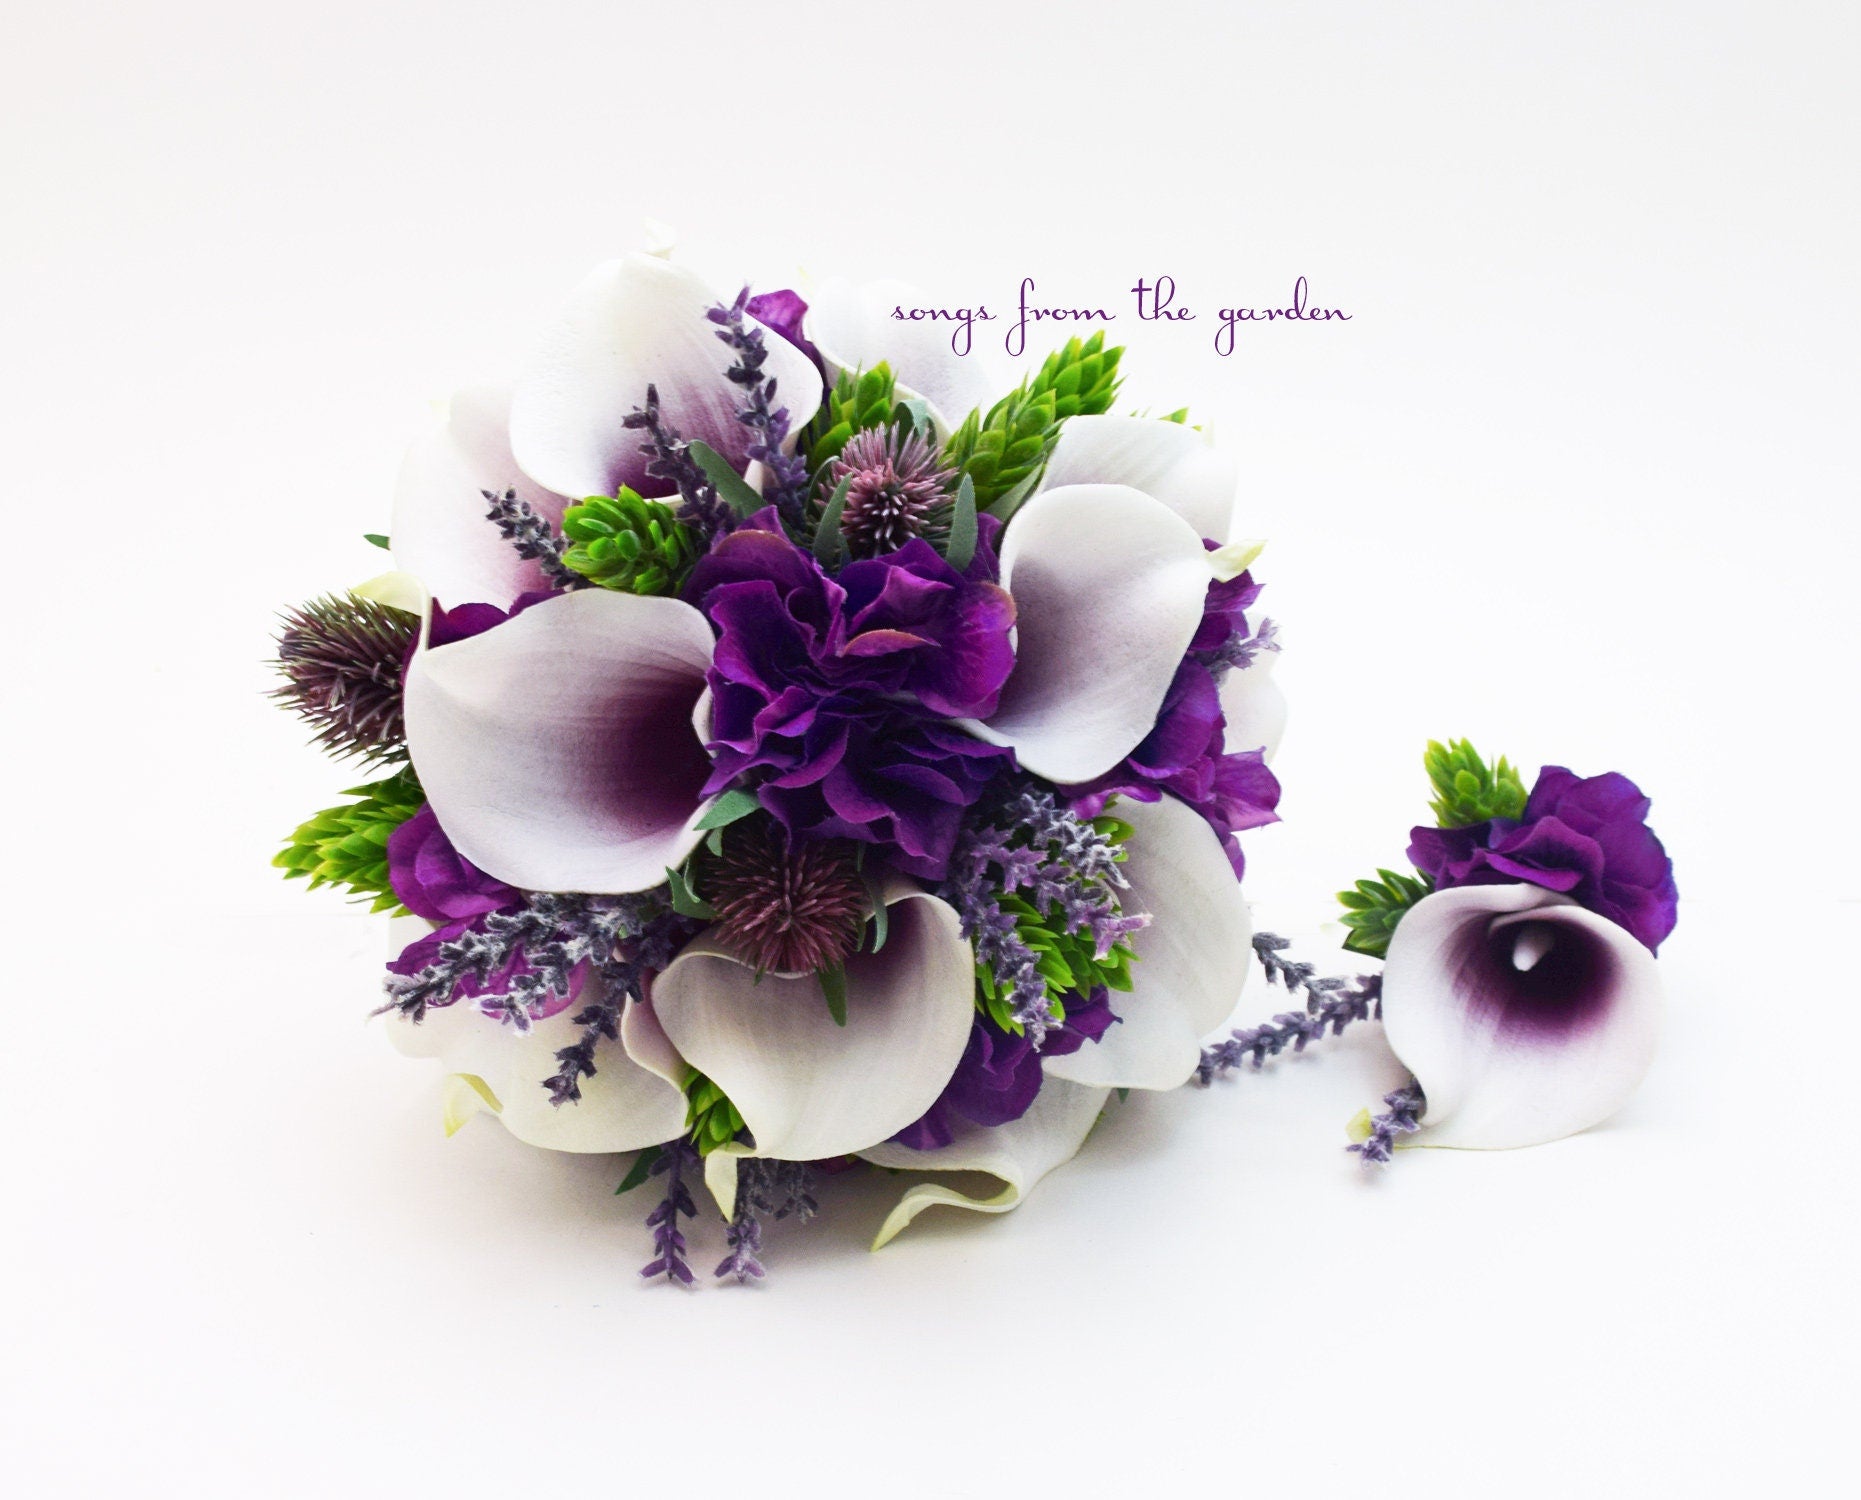 Bridal or Bridesmaid Bouquet Thistle Callas Hops - Add a Groom or Groomsman Boutonniere - Add Wedding Arch Flowers Centerpieces and More!